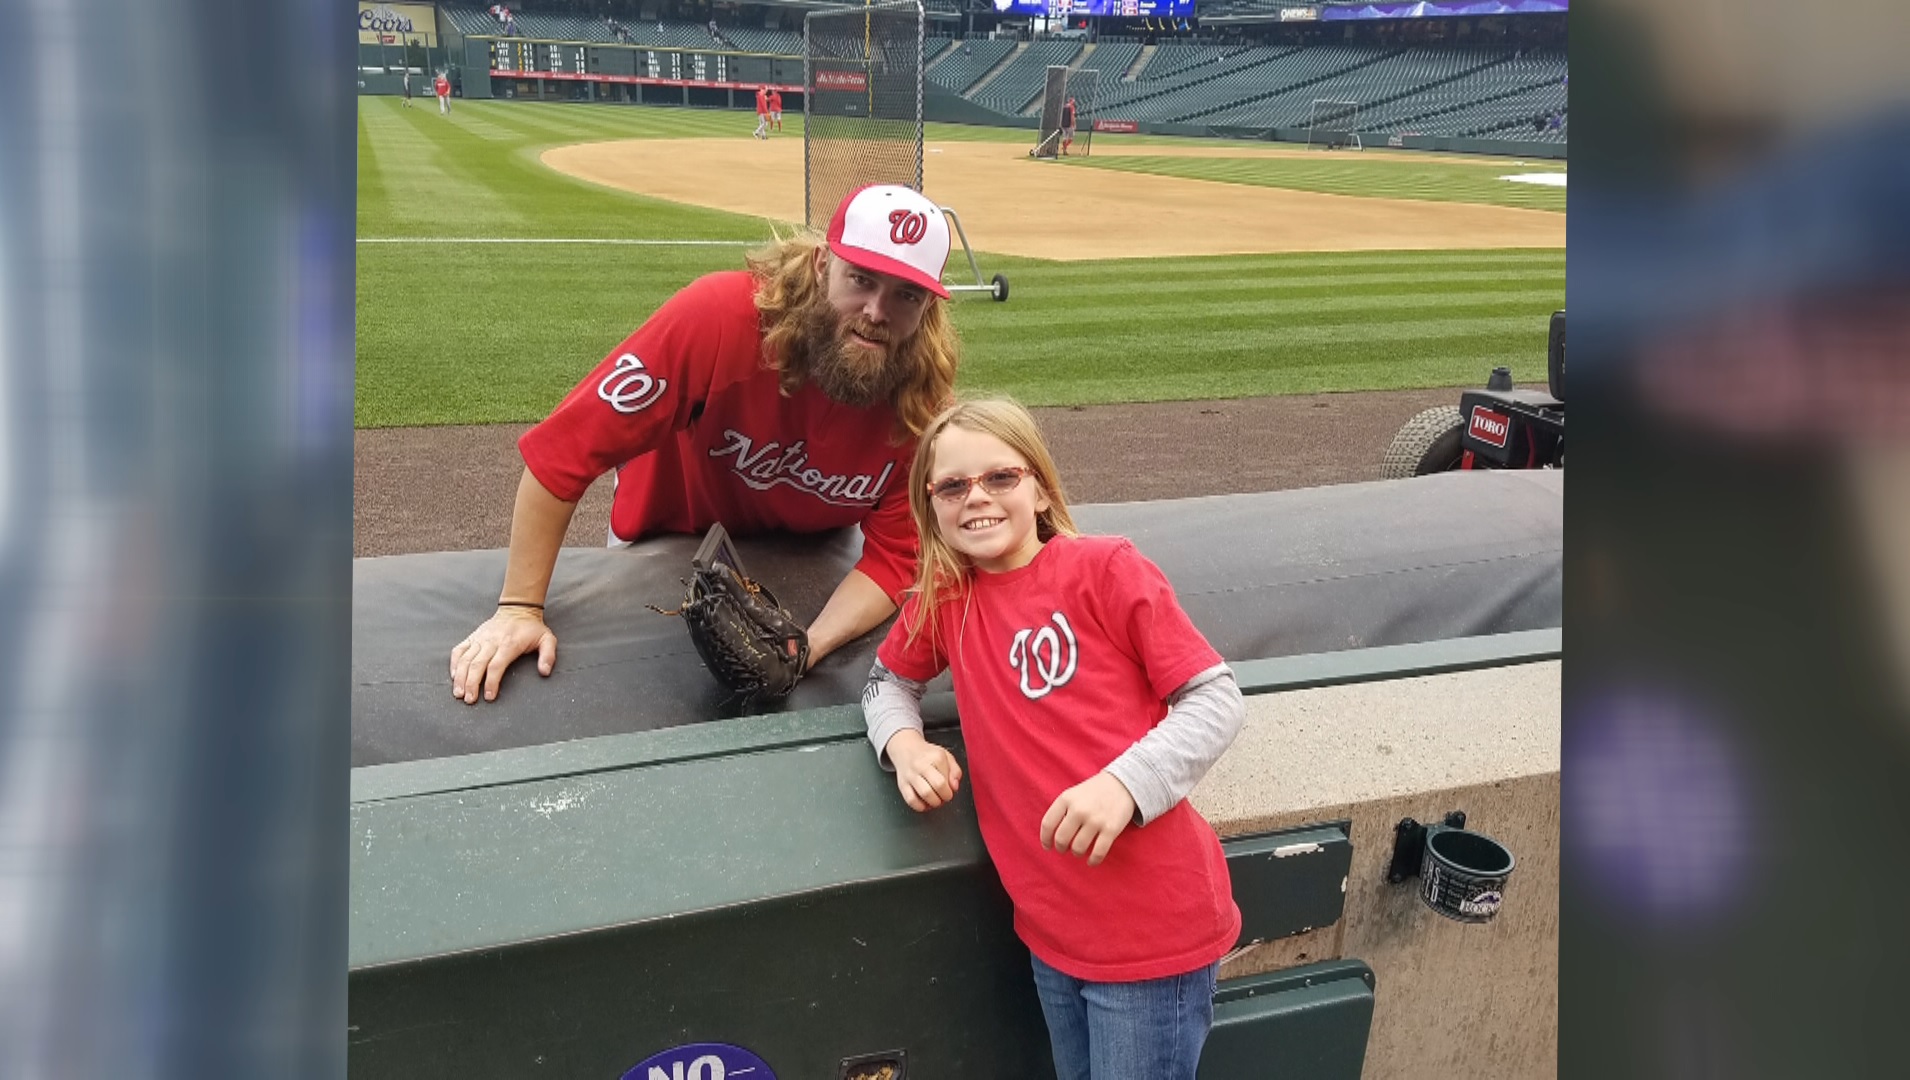 Jayson Werth's biggest fan raises money for kids with cancer